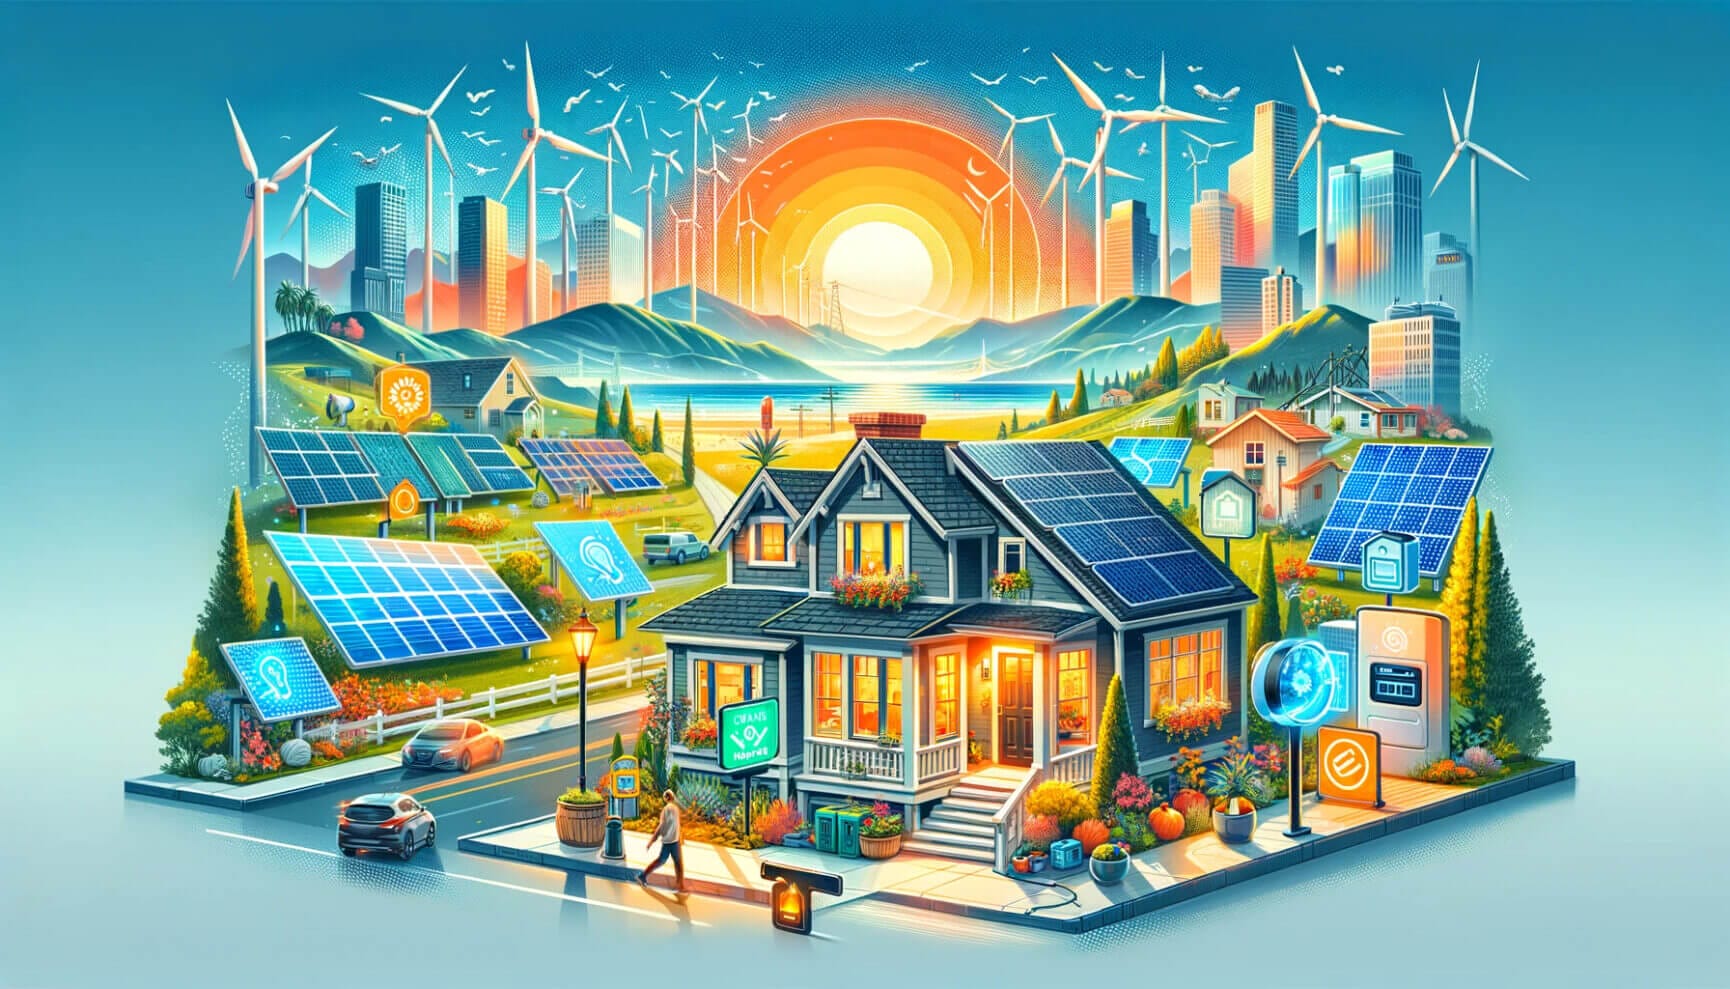 An illustration of a house with solar panels and wind turbines.